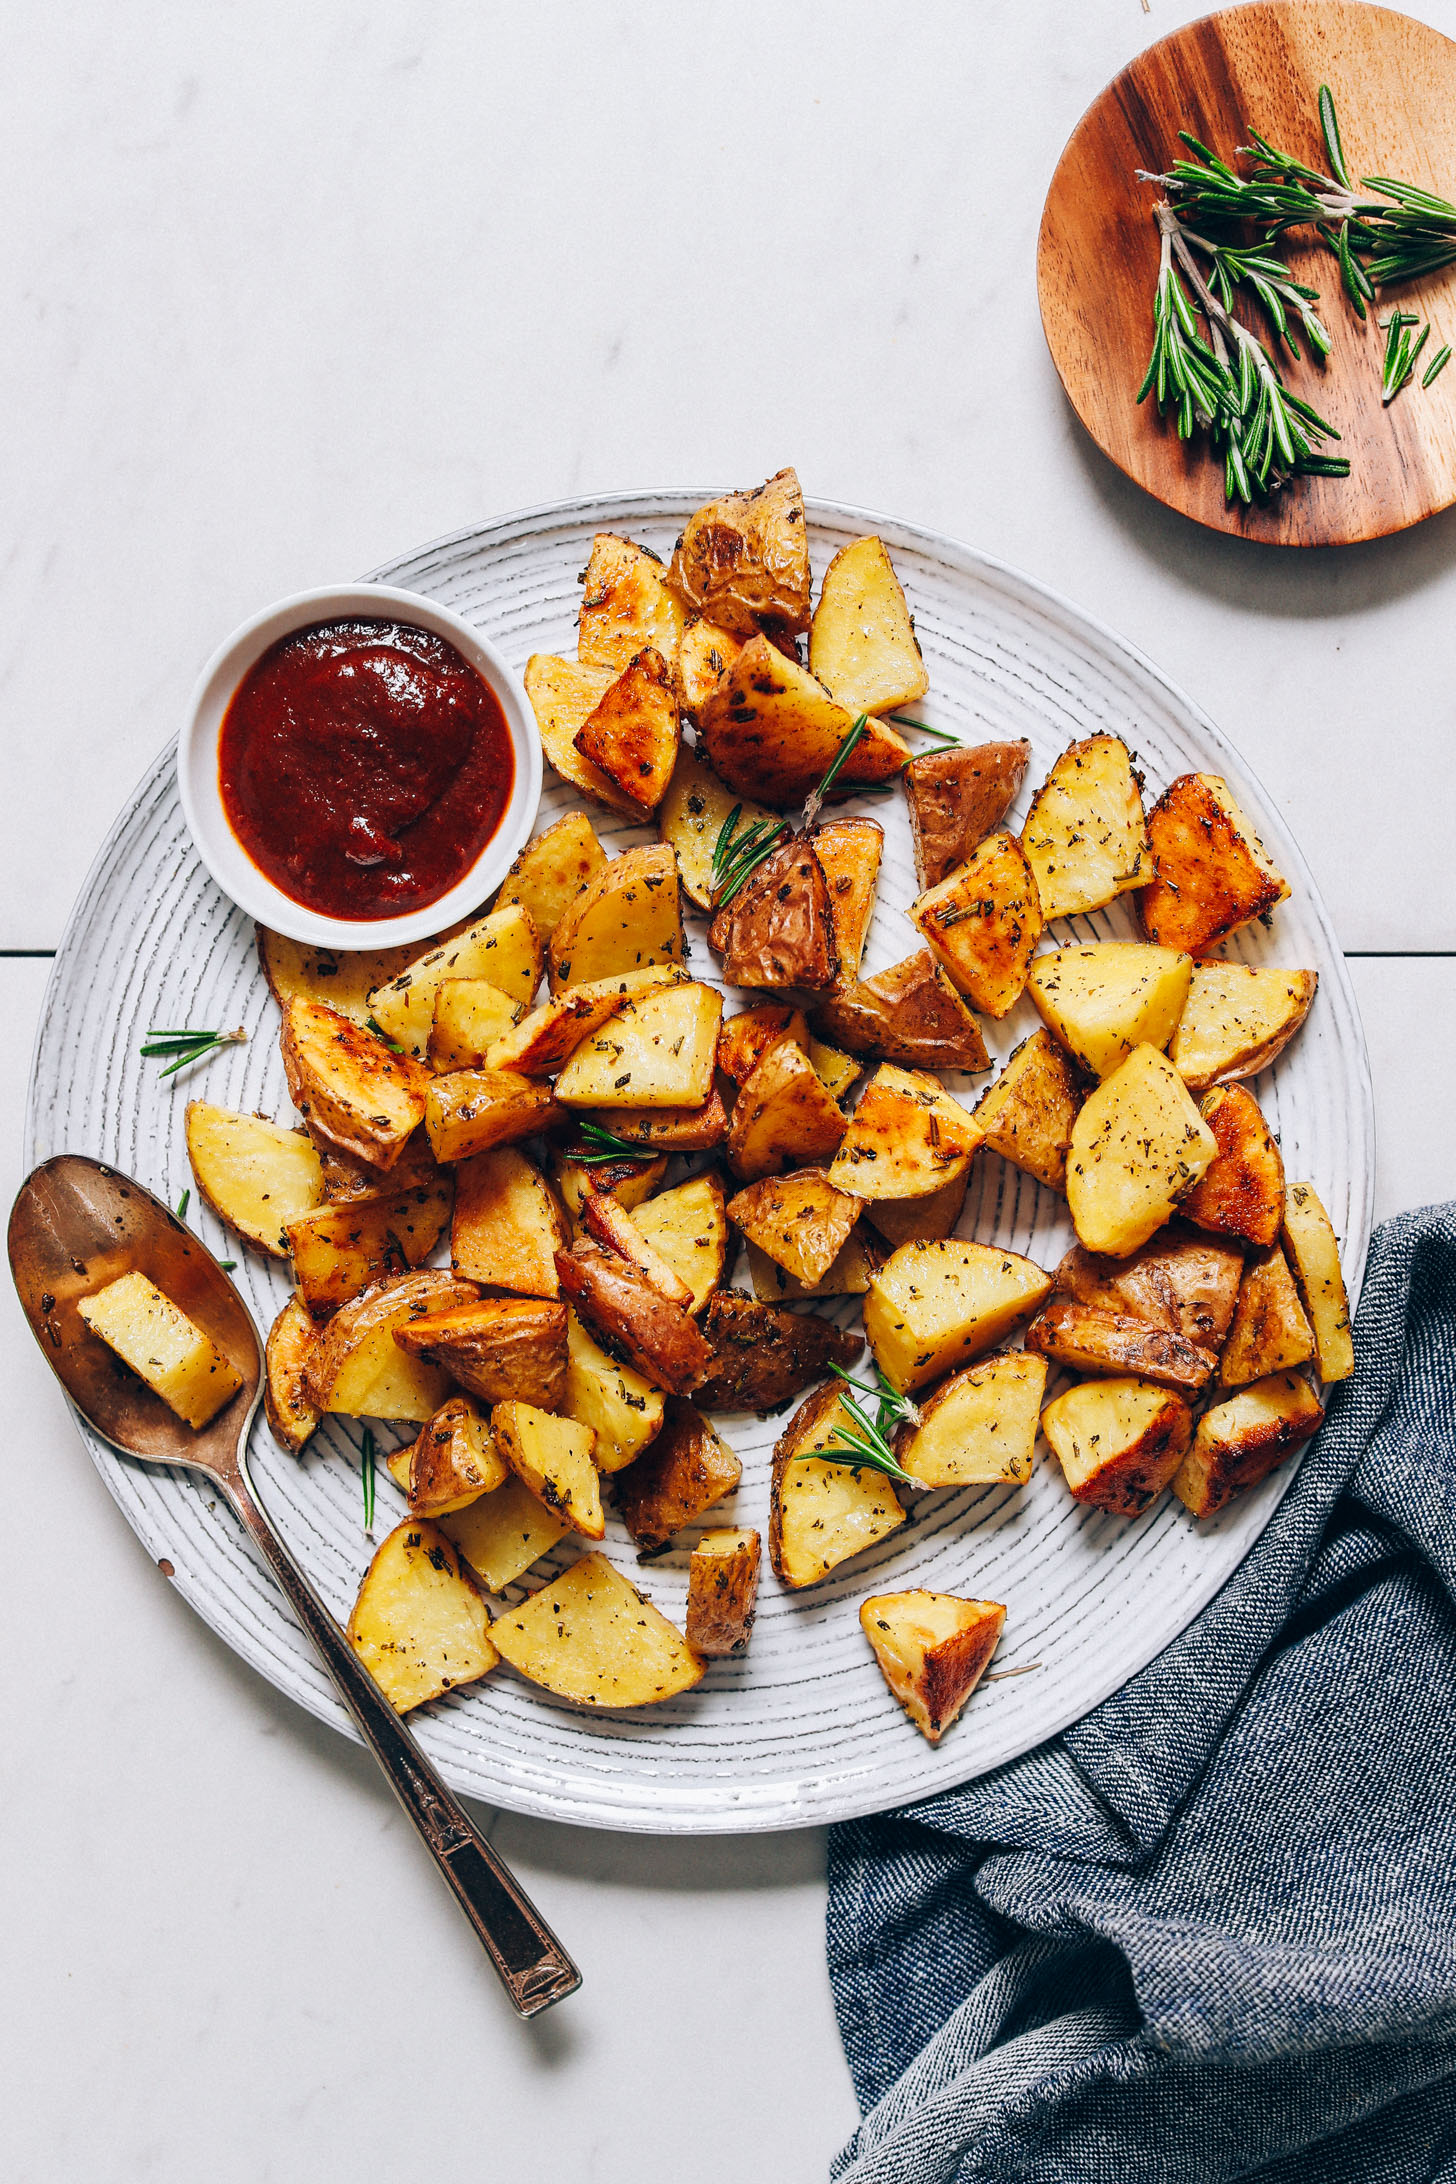 Large plate of Oven Roasted Potatoes with rosemary and ketchup